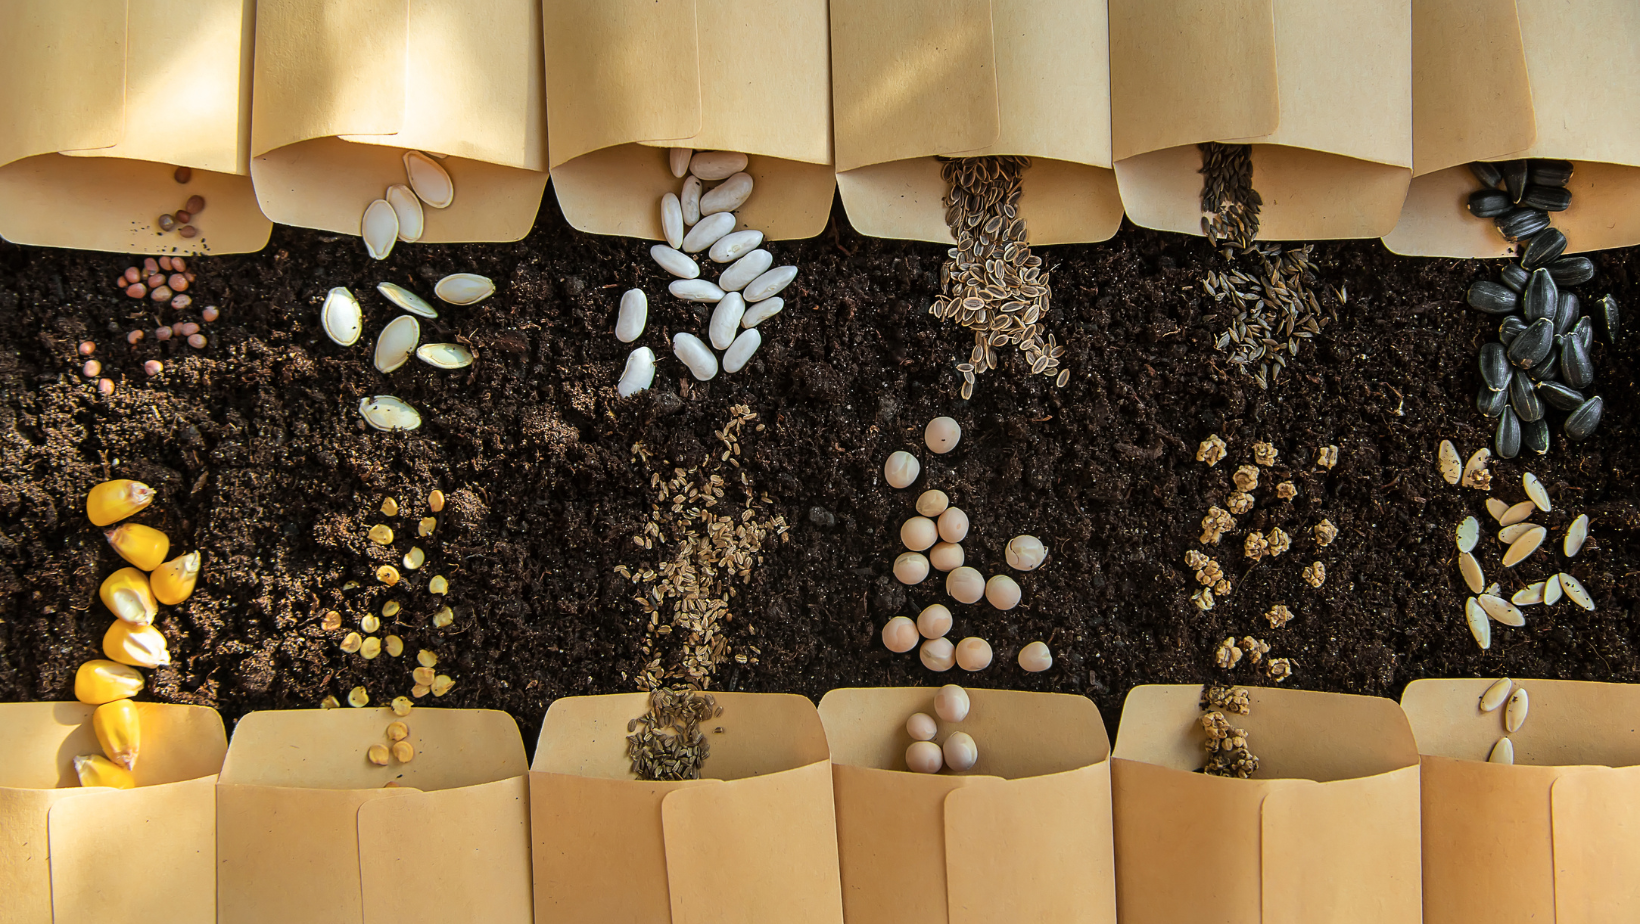 Rows of brown envelopes are lying on the soil. The envelopes are open, with a variety of different types of seeds spilling out onto the Earth.